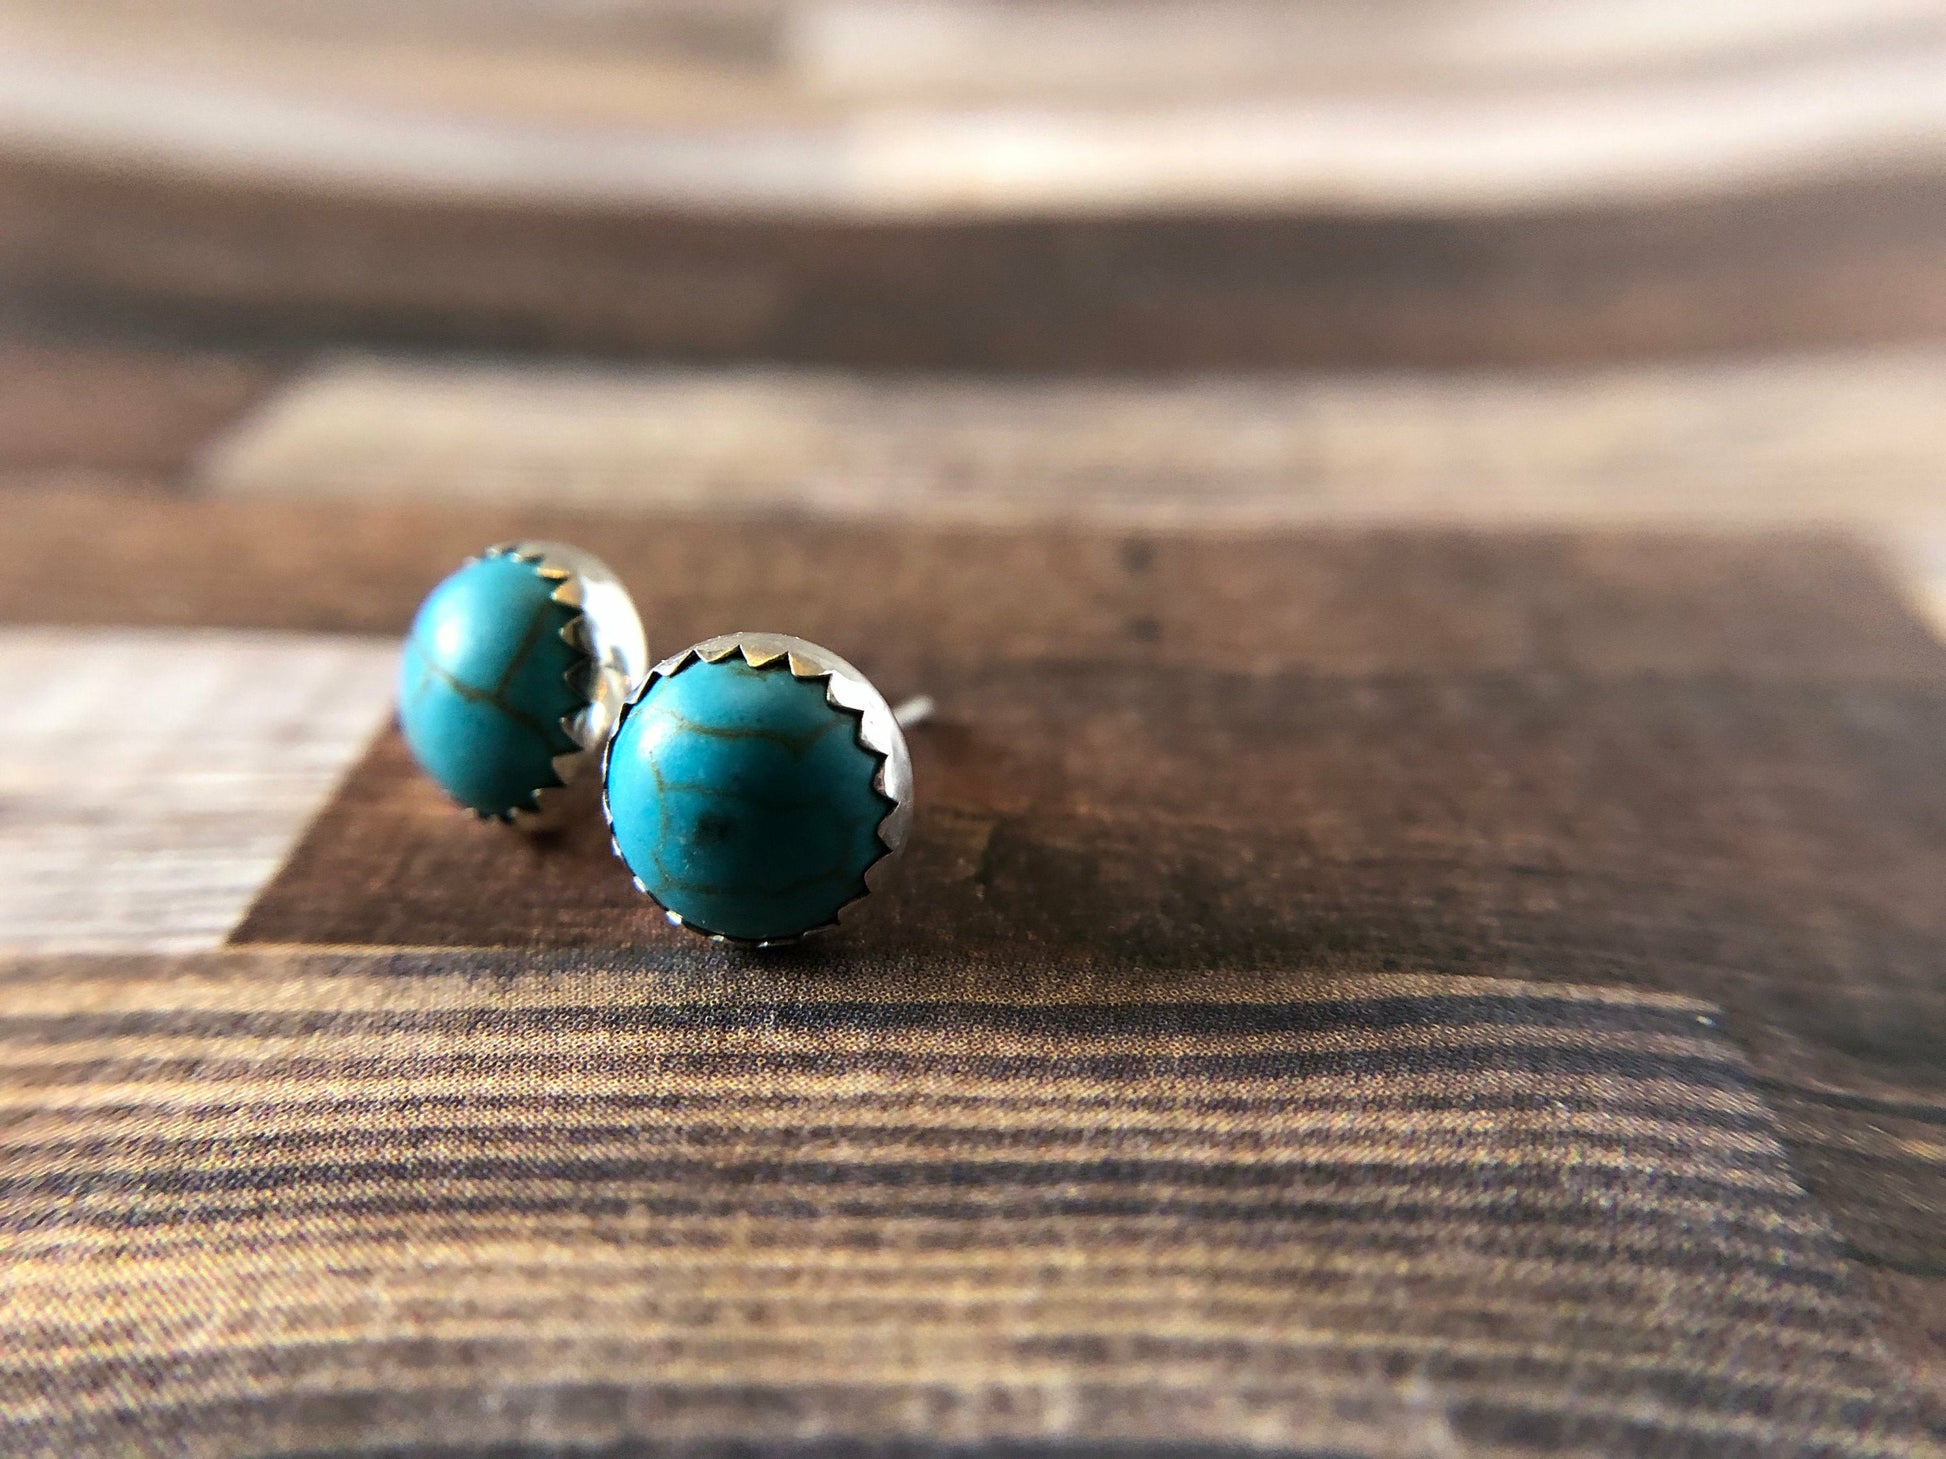 sterling-silver-turquoise-earrings-silver-turquoise-studs-silver-studs-studs-turquoise-studs-silver-earrings-gifts-for-her-blue-earrings